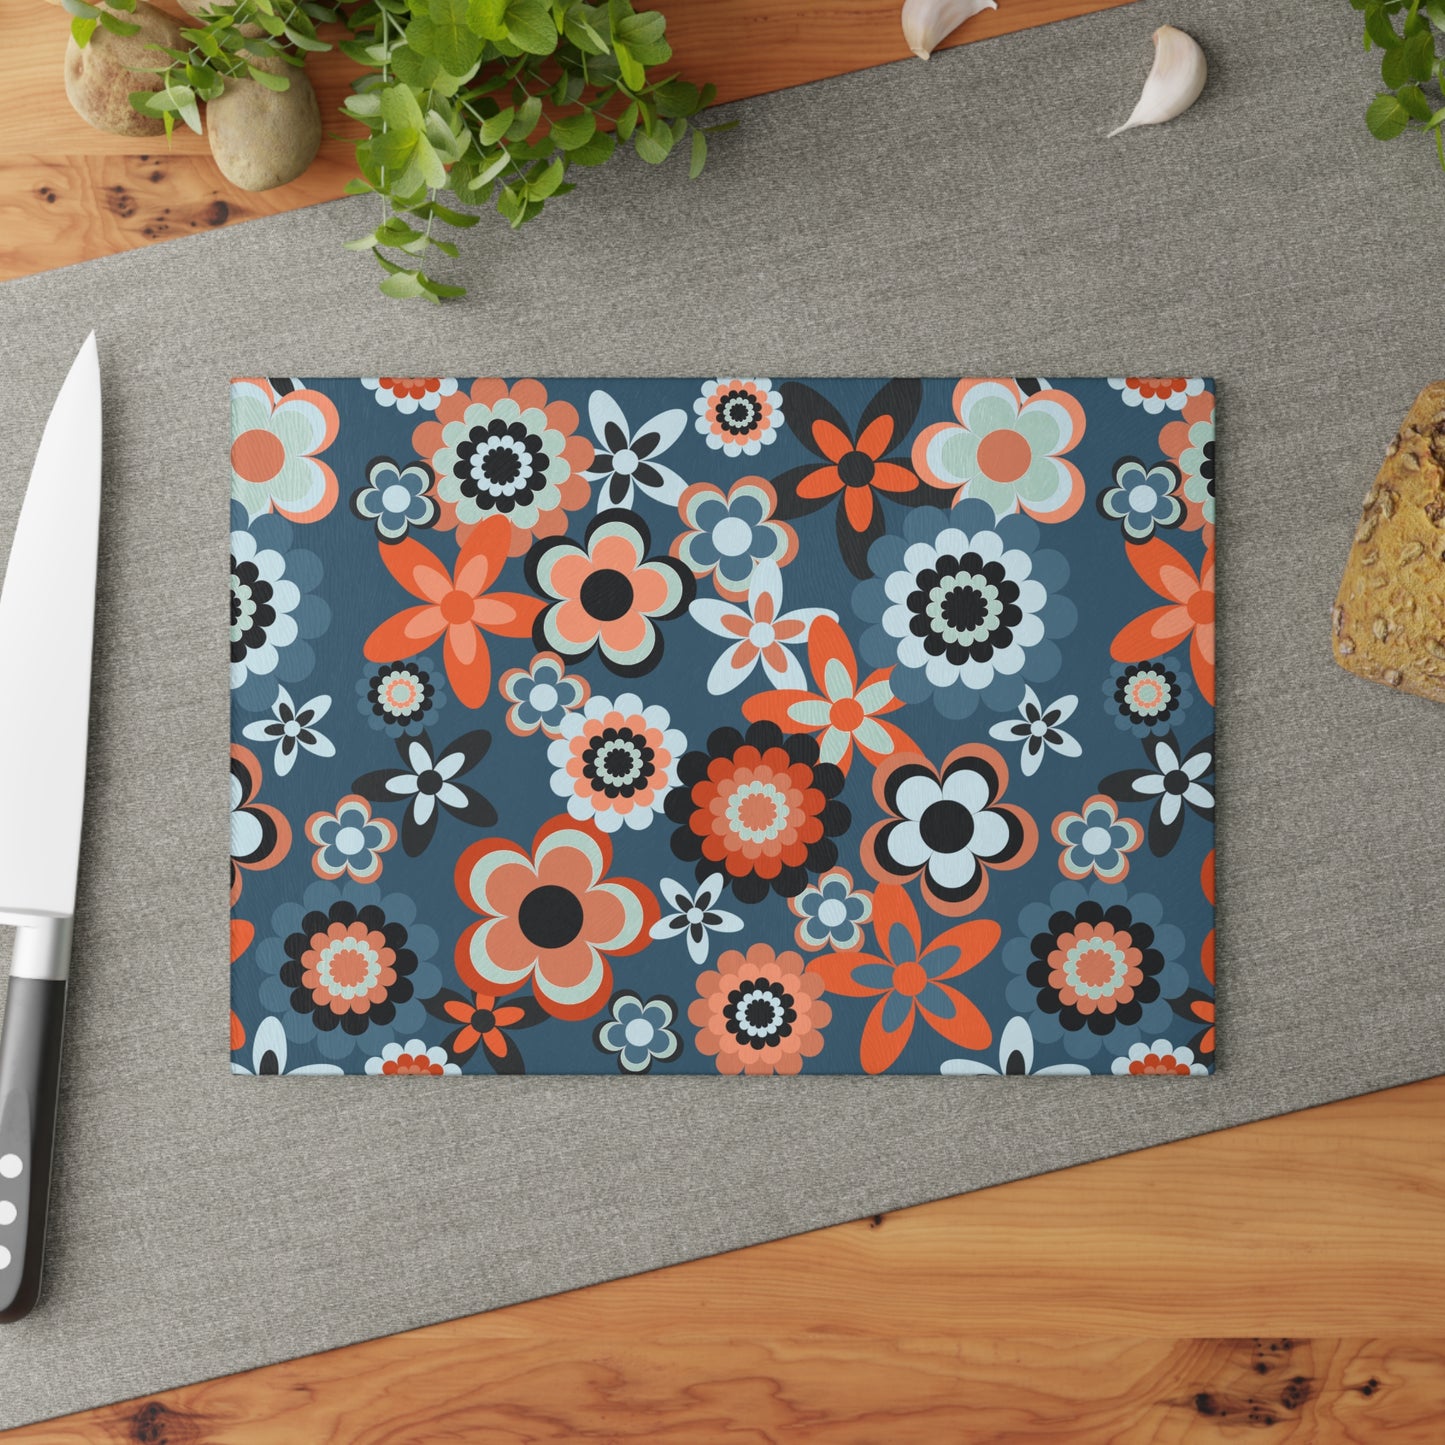 Retro 60s 70s Groovy Flowers Boho MCM Coral & Blue Glass Cutting Board